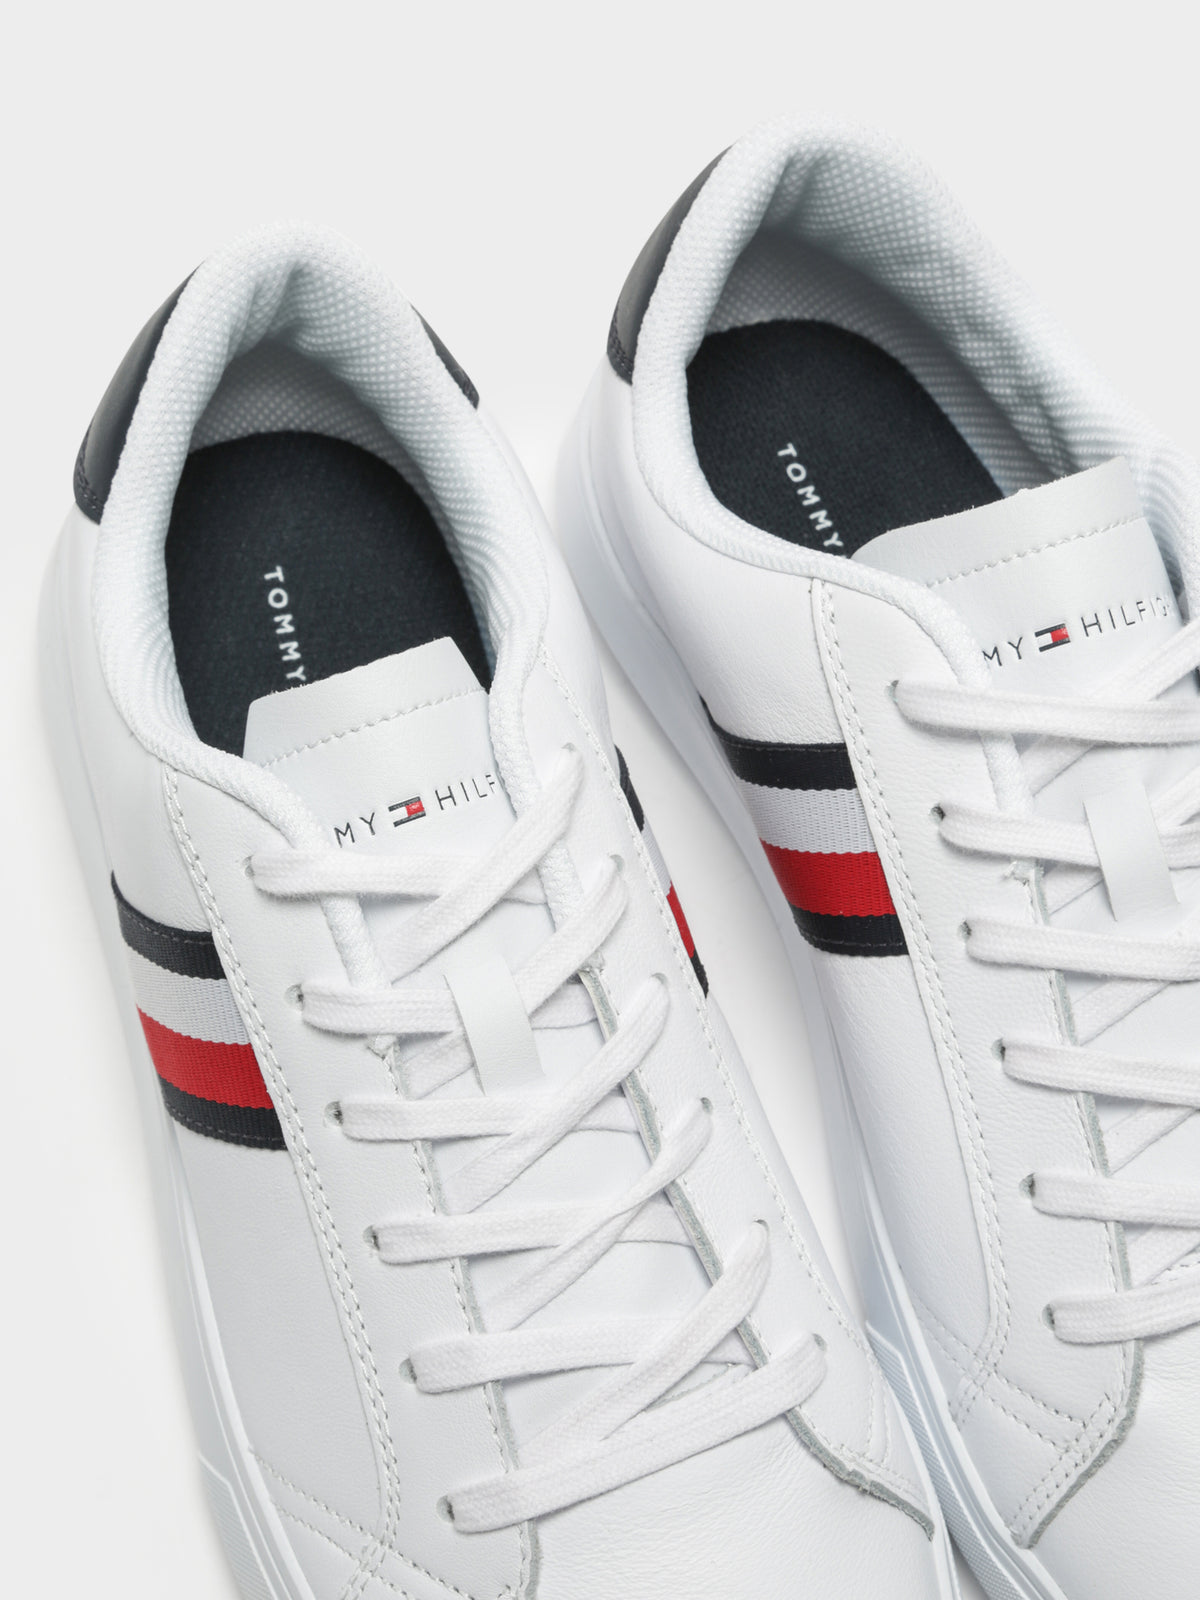 Mens Essential Leather Sneakers in White